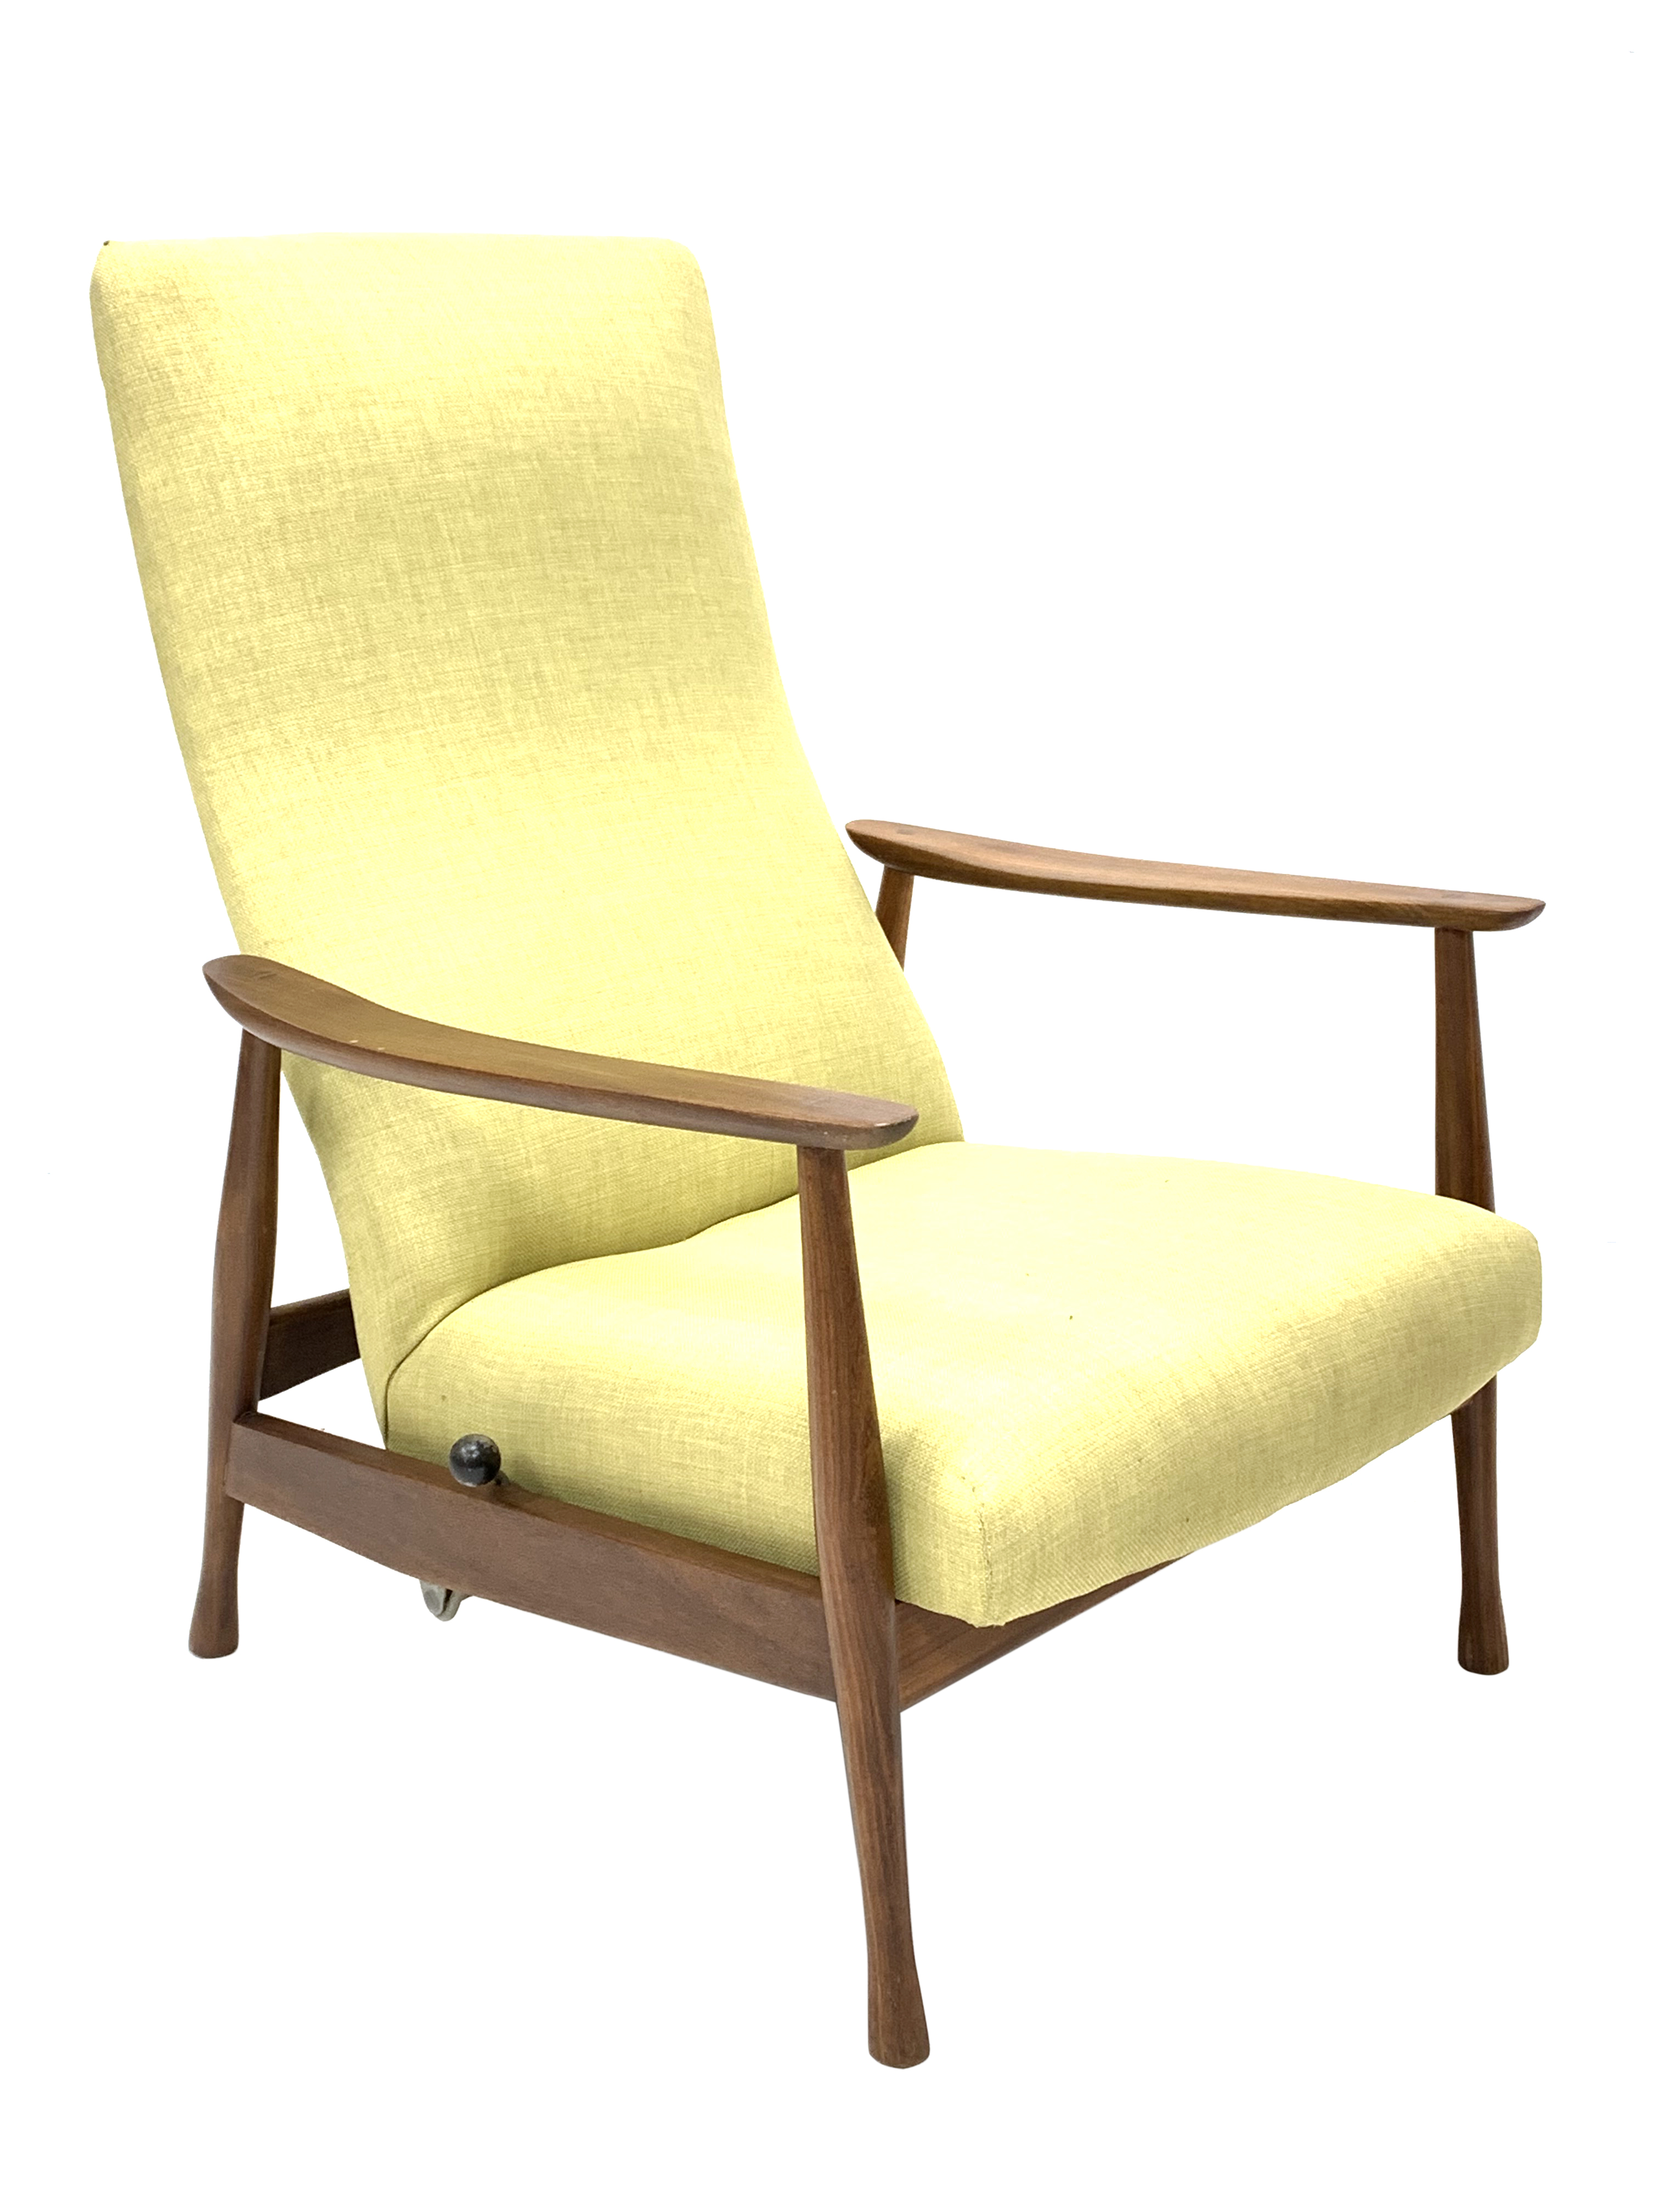 Milo Baughman - Danish teak framed rocking and reclining lounger armchair with rest lever,